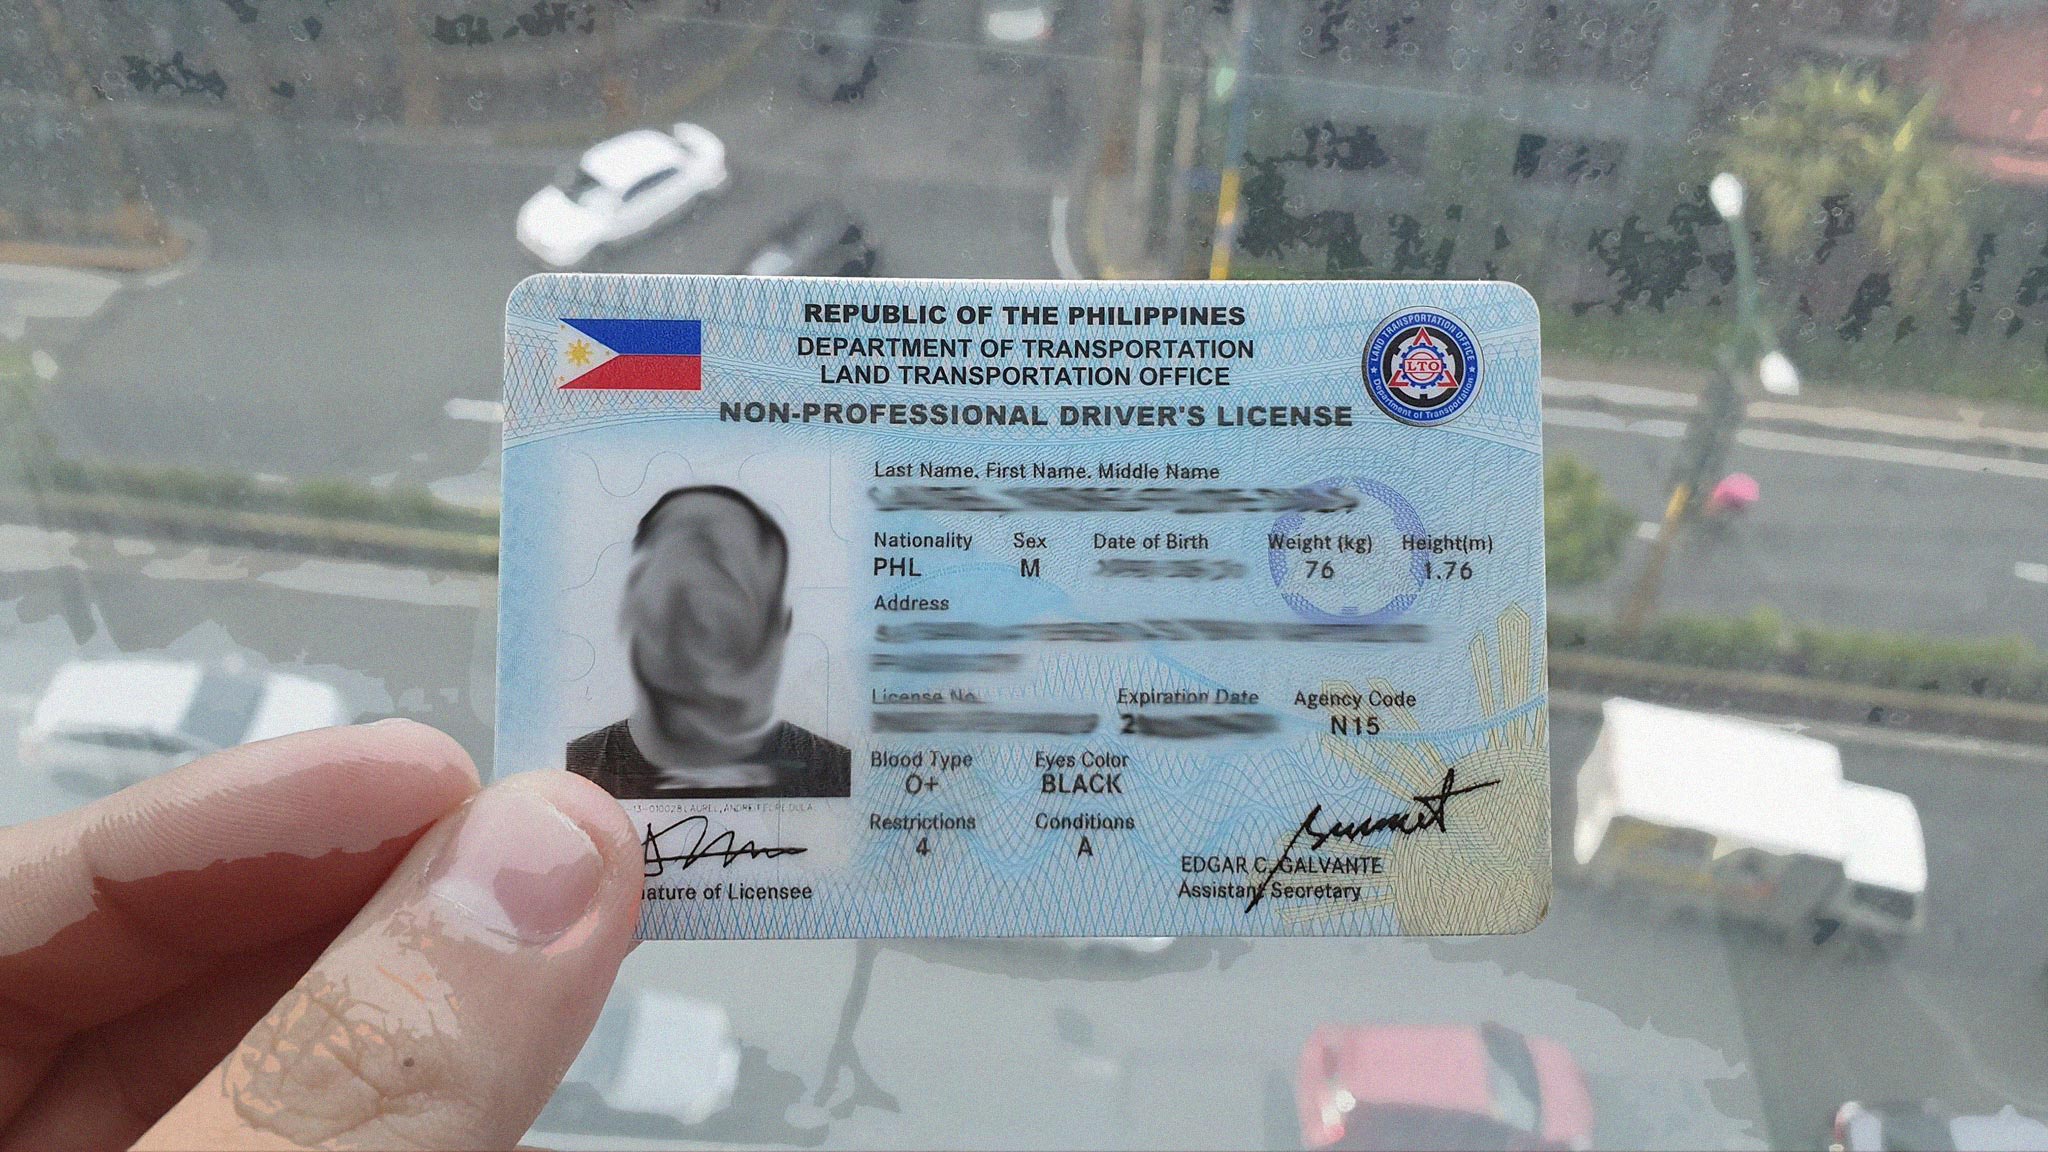 Validity of LTO driver’s license, student permits extended